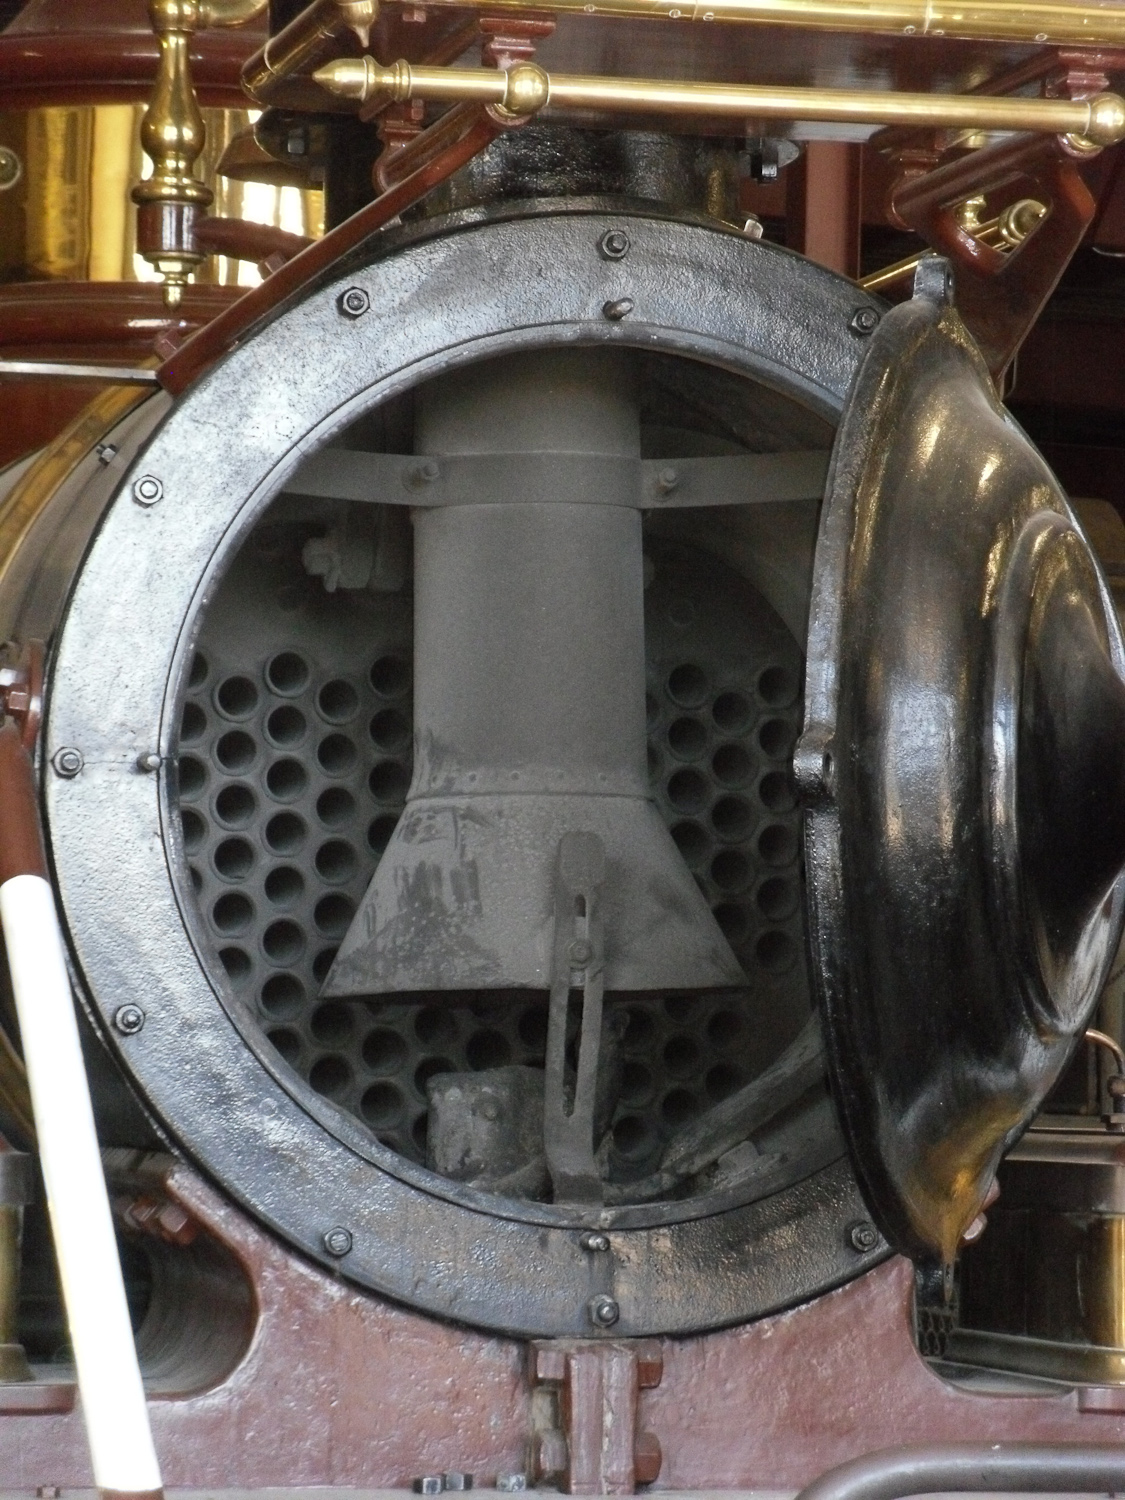 Close-up view of the Inyo boiler and venturi.